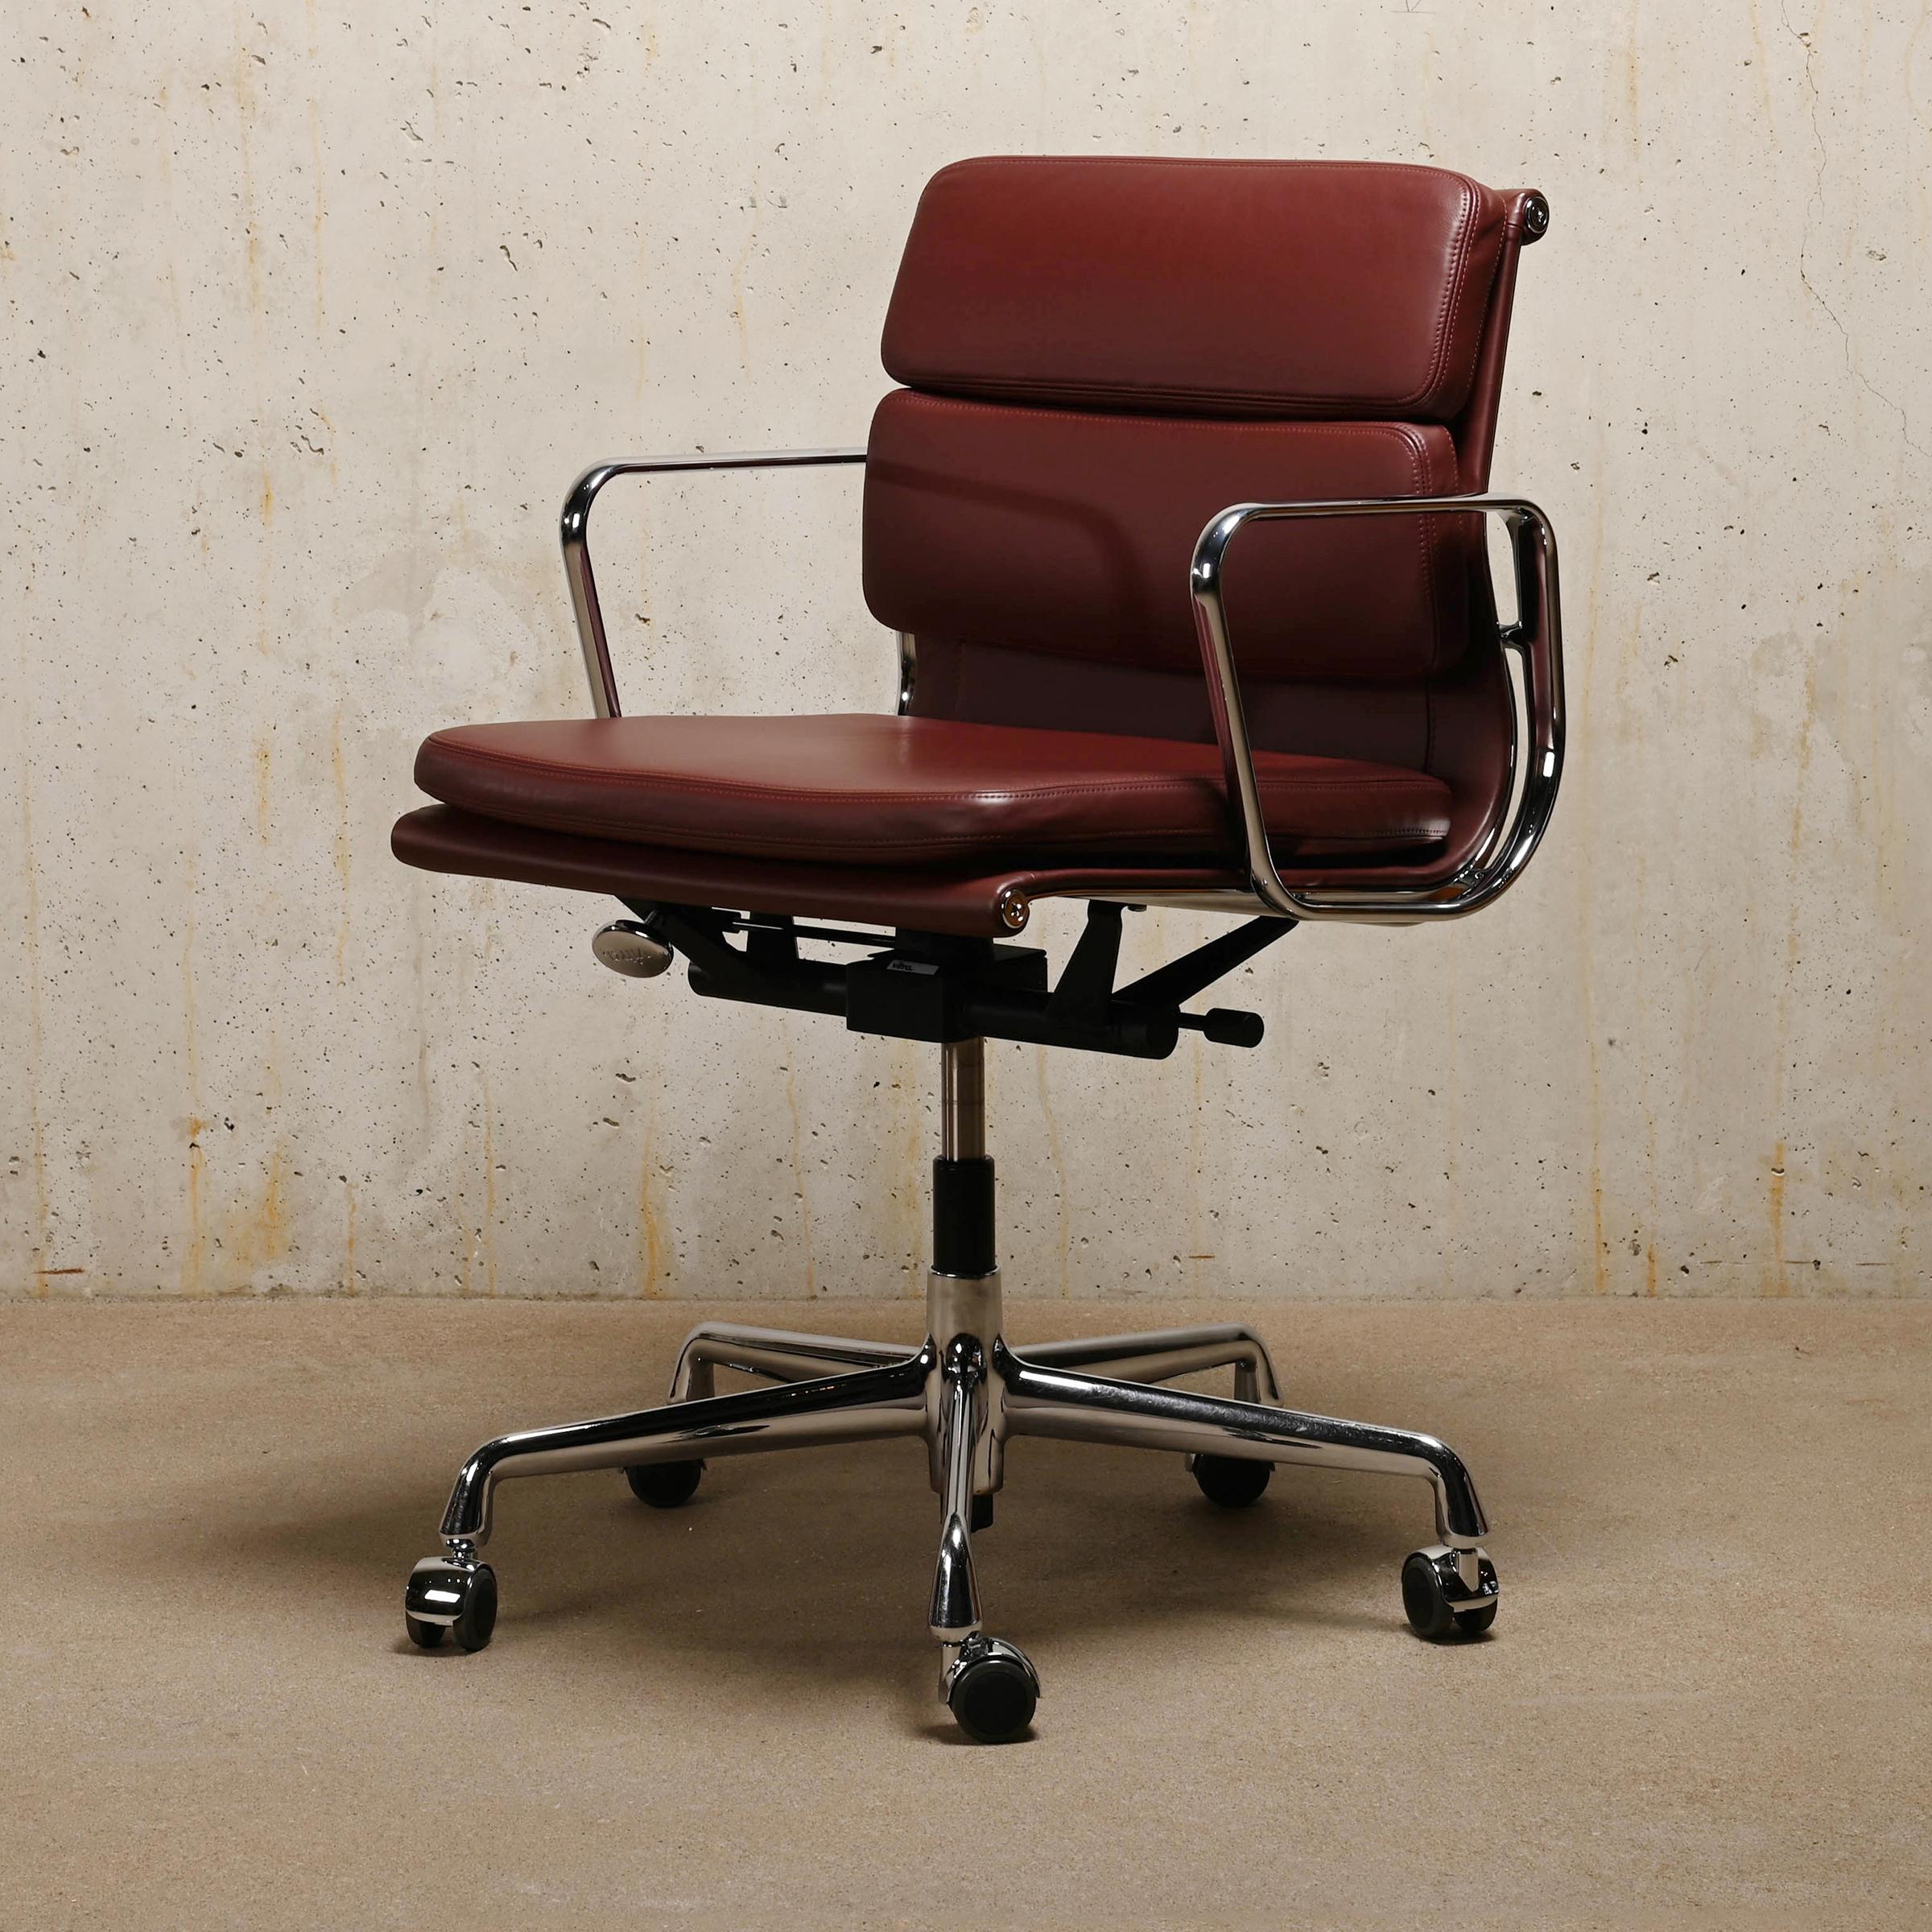 Aluminum Charles & Ray Eames EA217 Office Chair in Brandy Leather and Chrome, Vitra